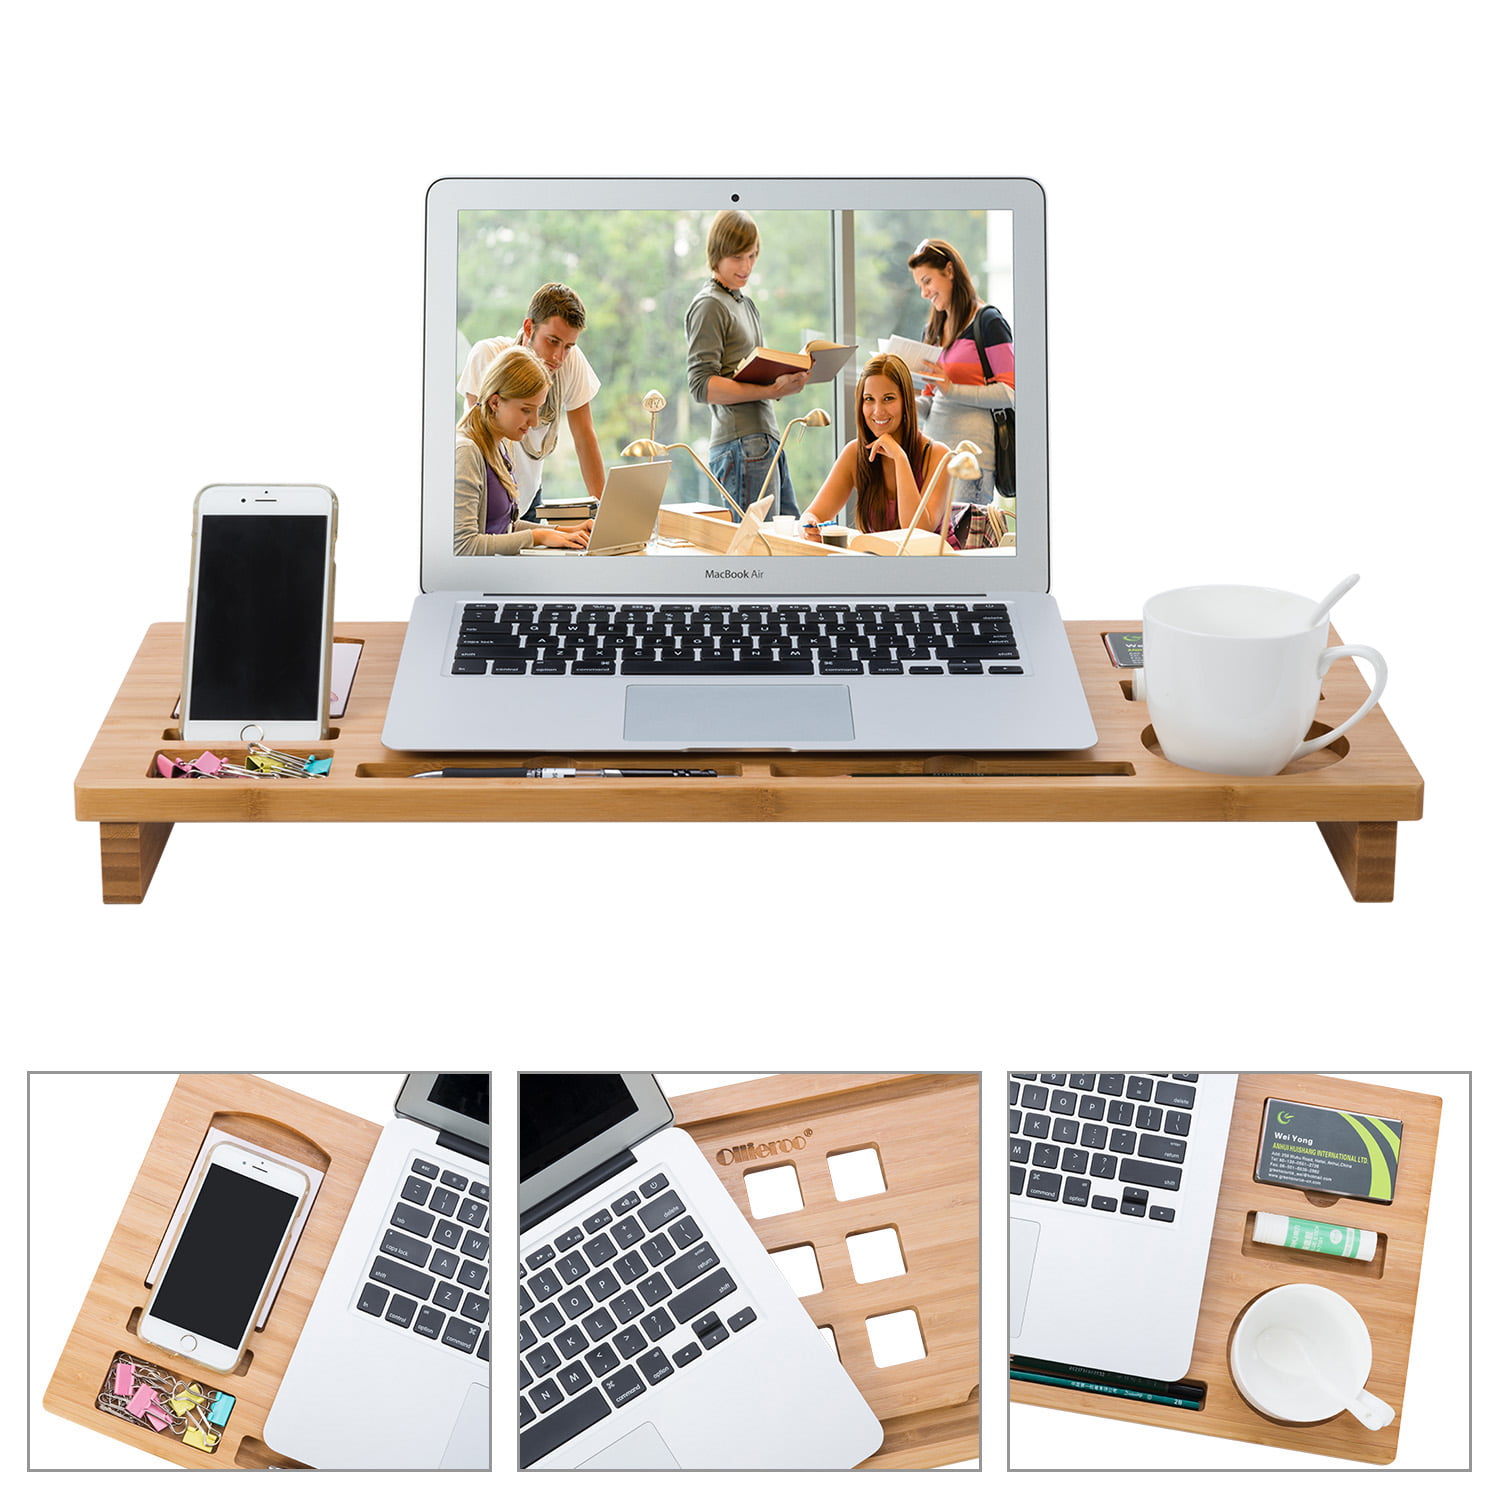 Monitor and Bamboo Natural Riser,Monitor Computer Air Stand Design Vents Desk Organizer Storage Allieroo with